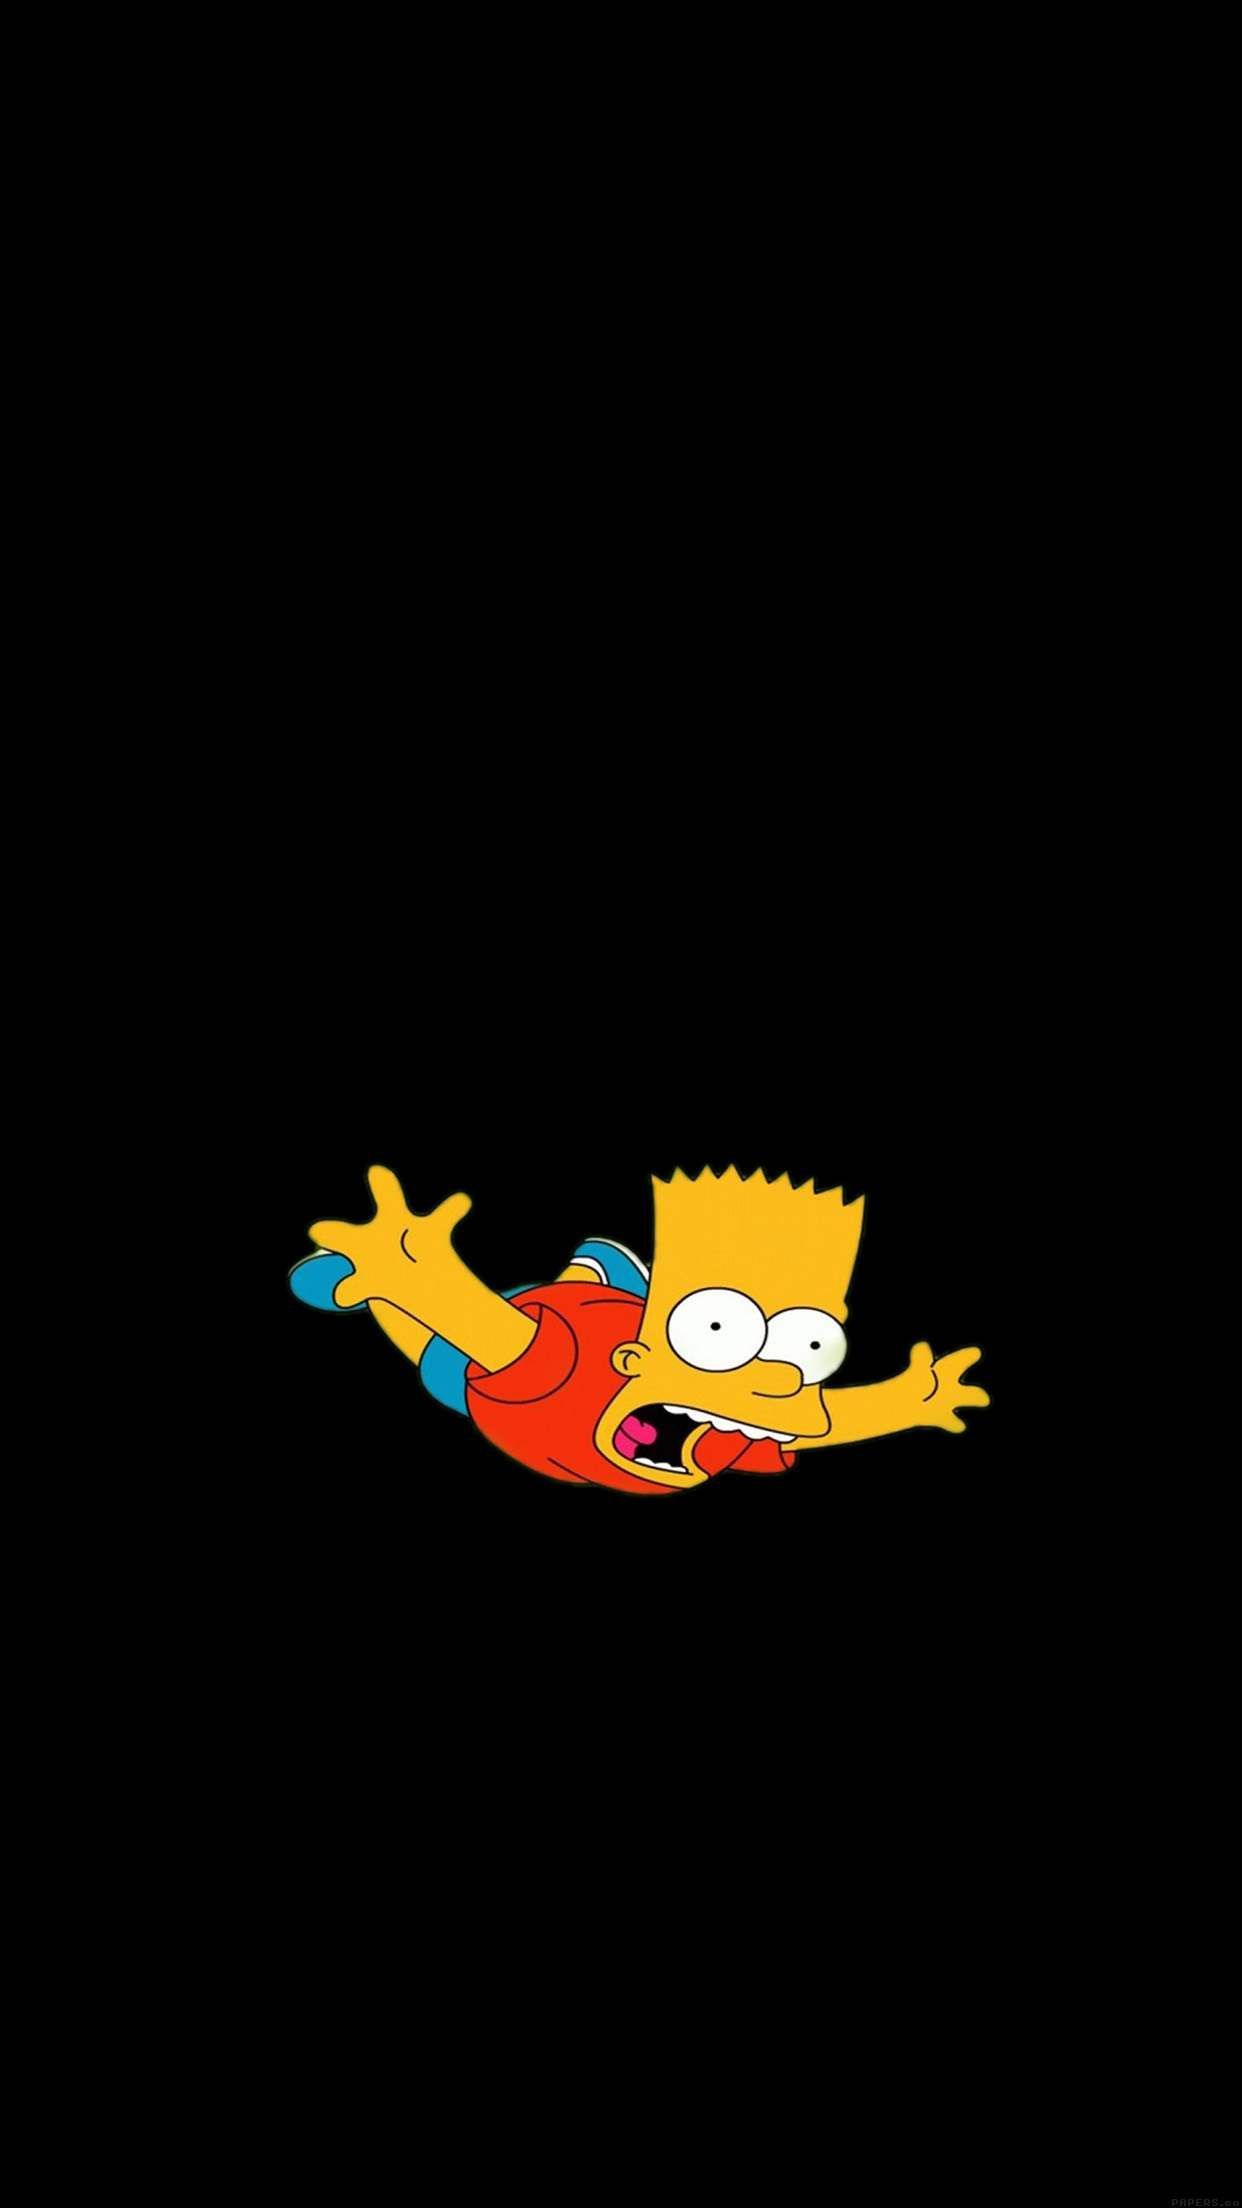 Bart Simpson black background wallpaper for iPhone and Android - The Simpsons, Bart Simpson